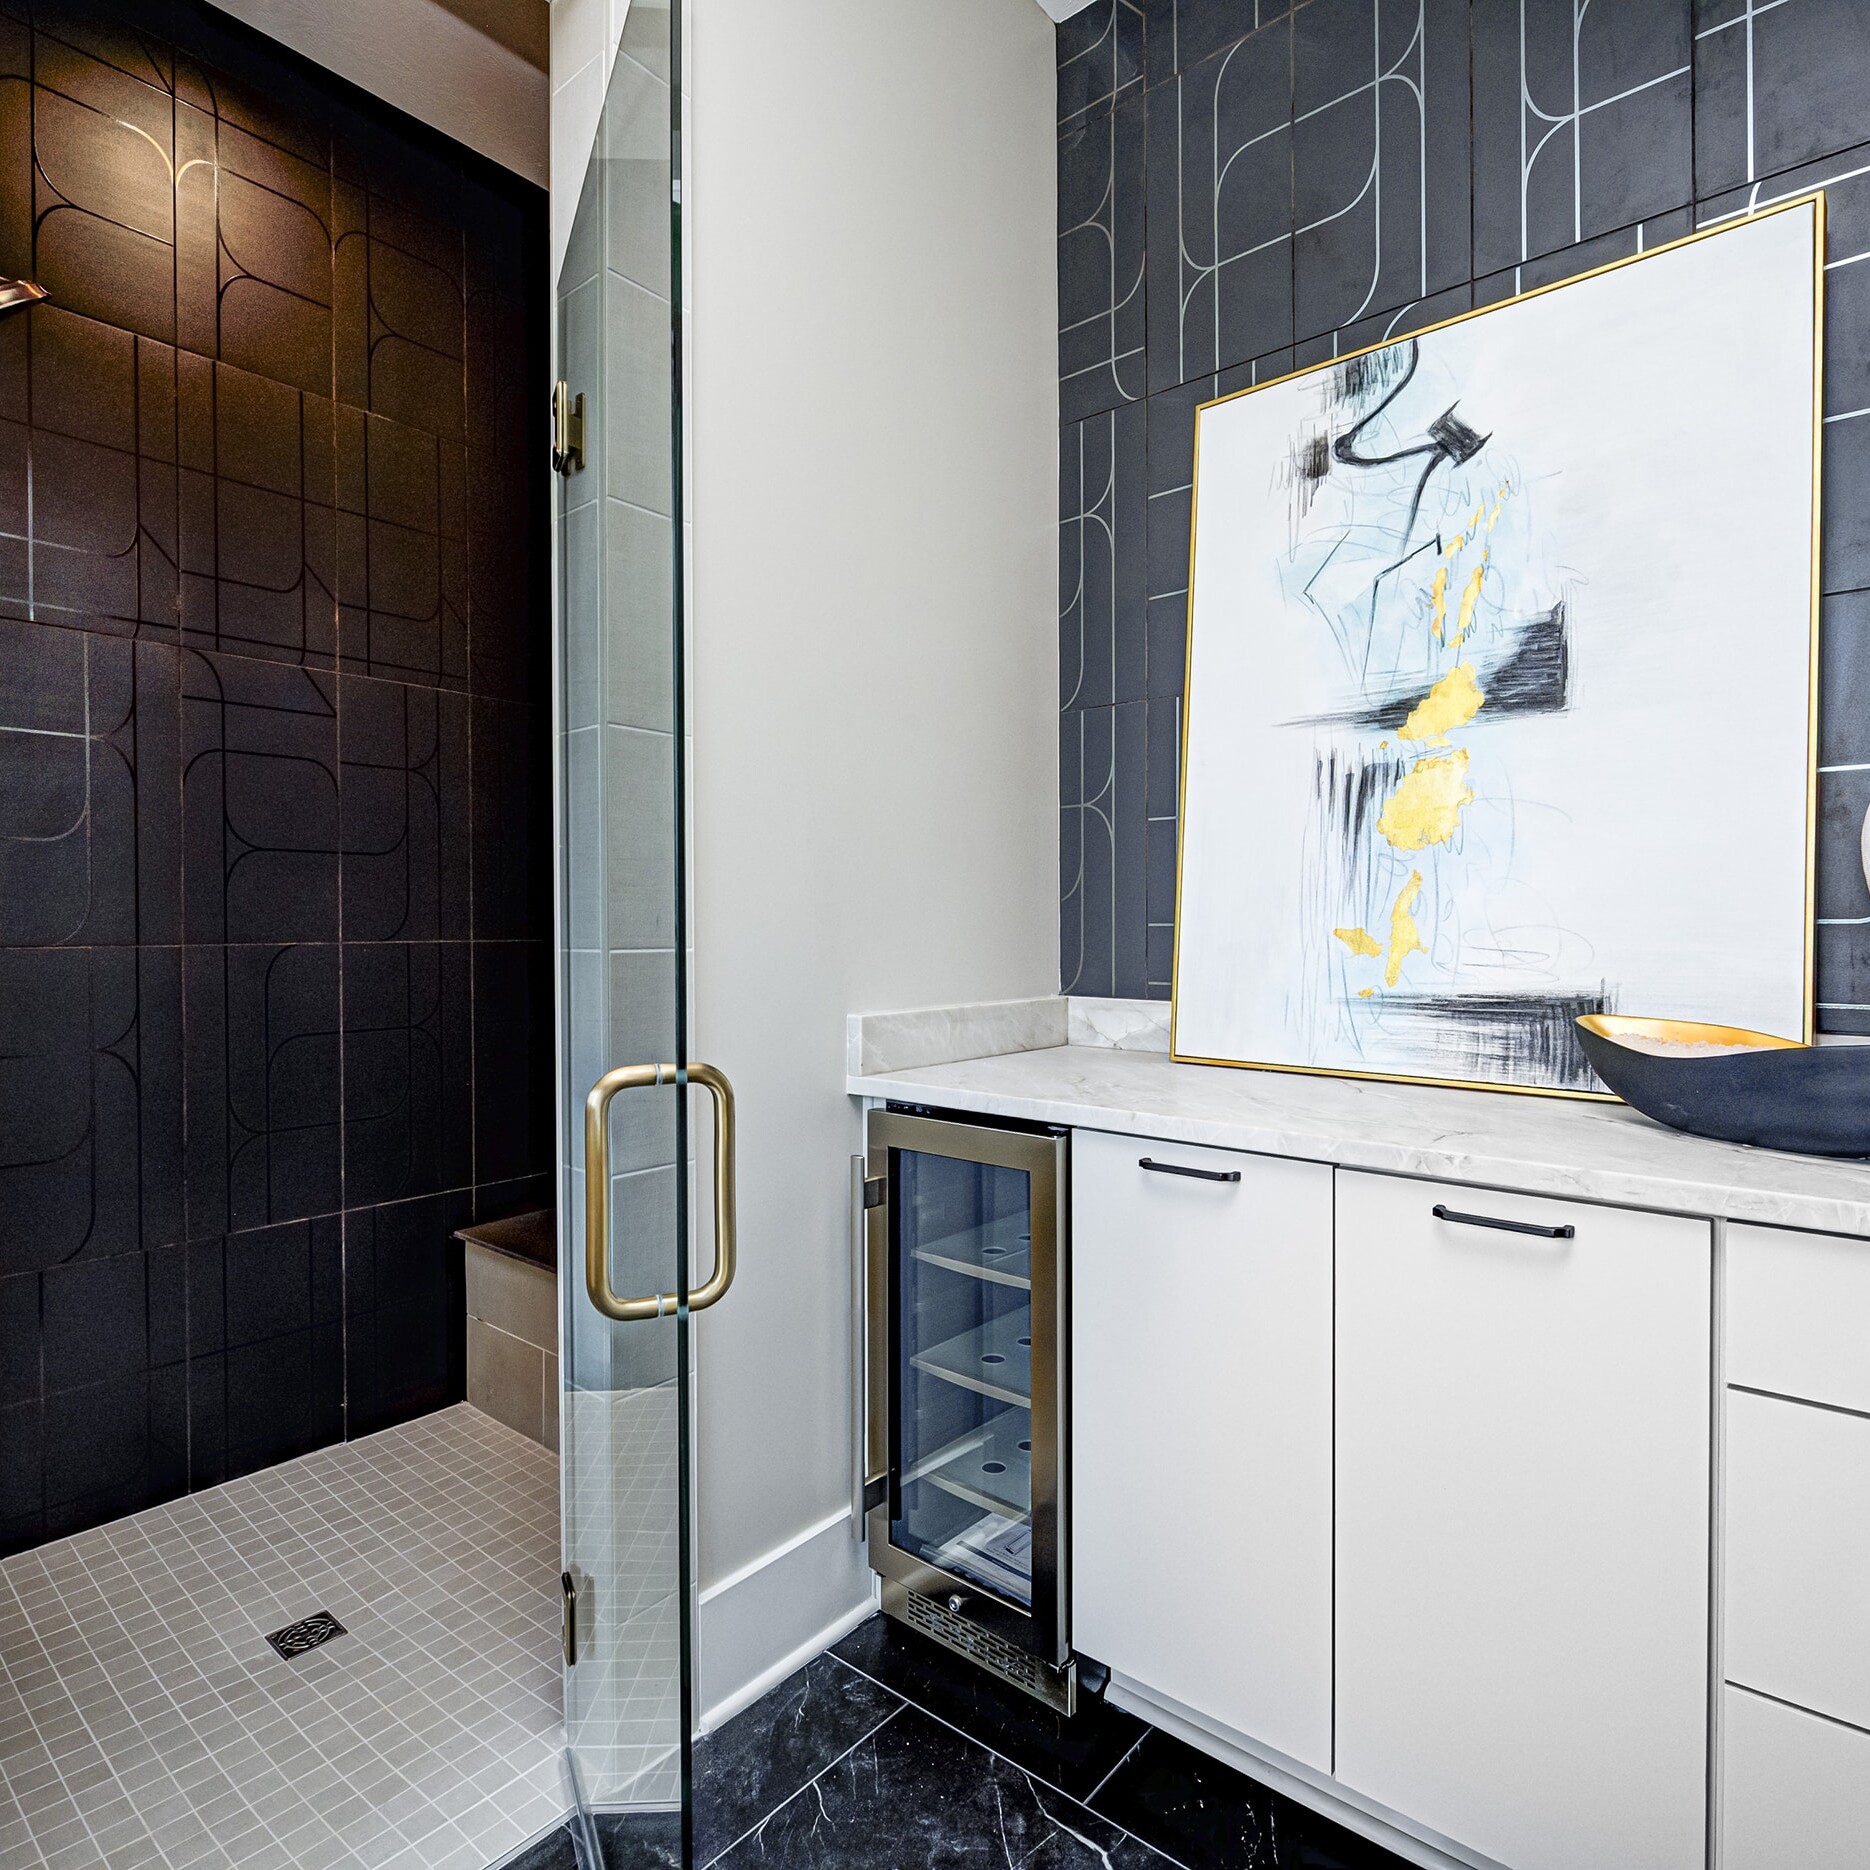 A bathroom with a black and white tiled shower.